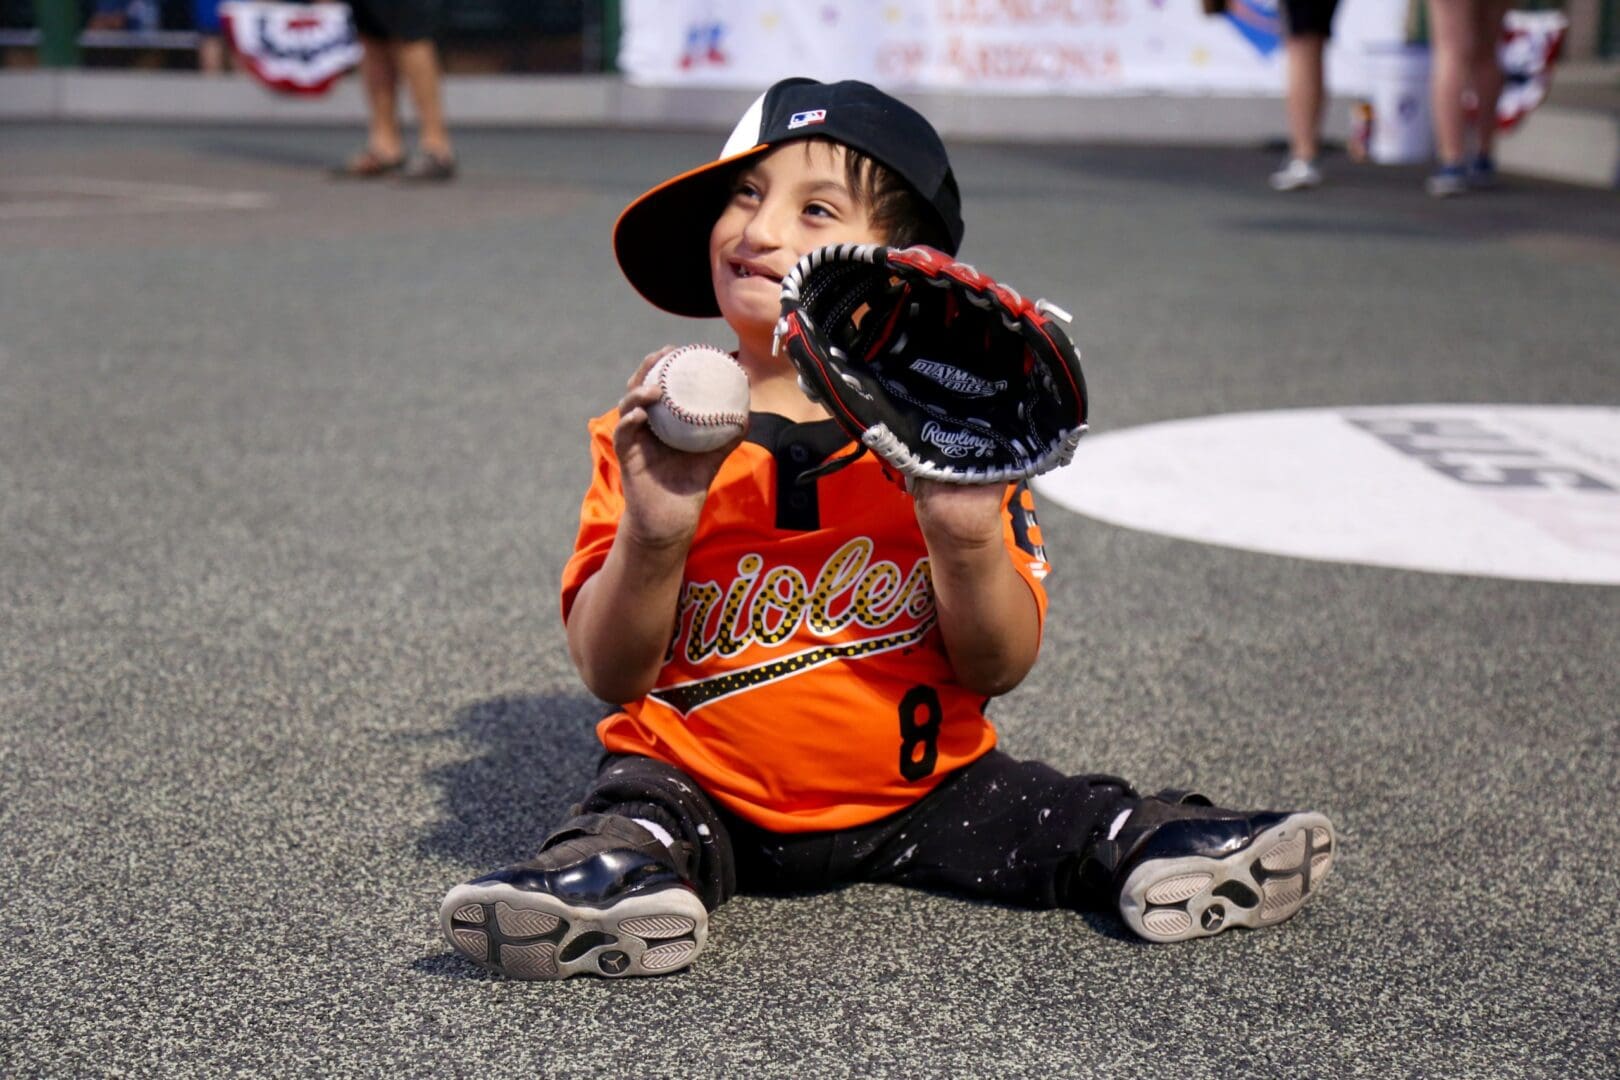 A young boy sitting on the ground holding a baseball.